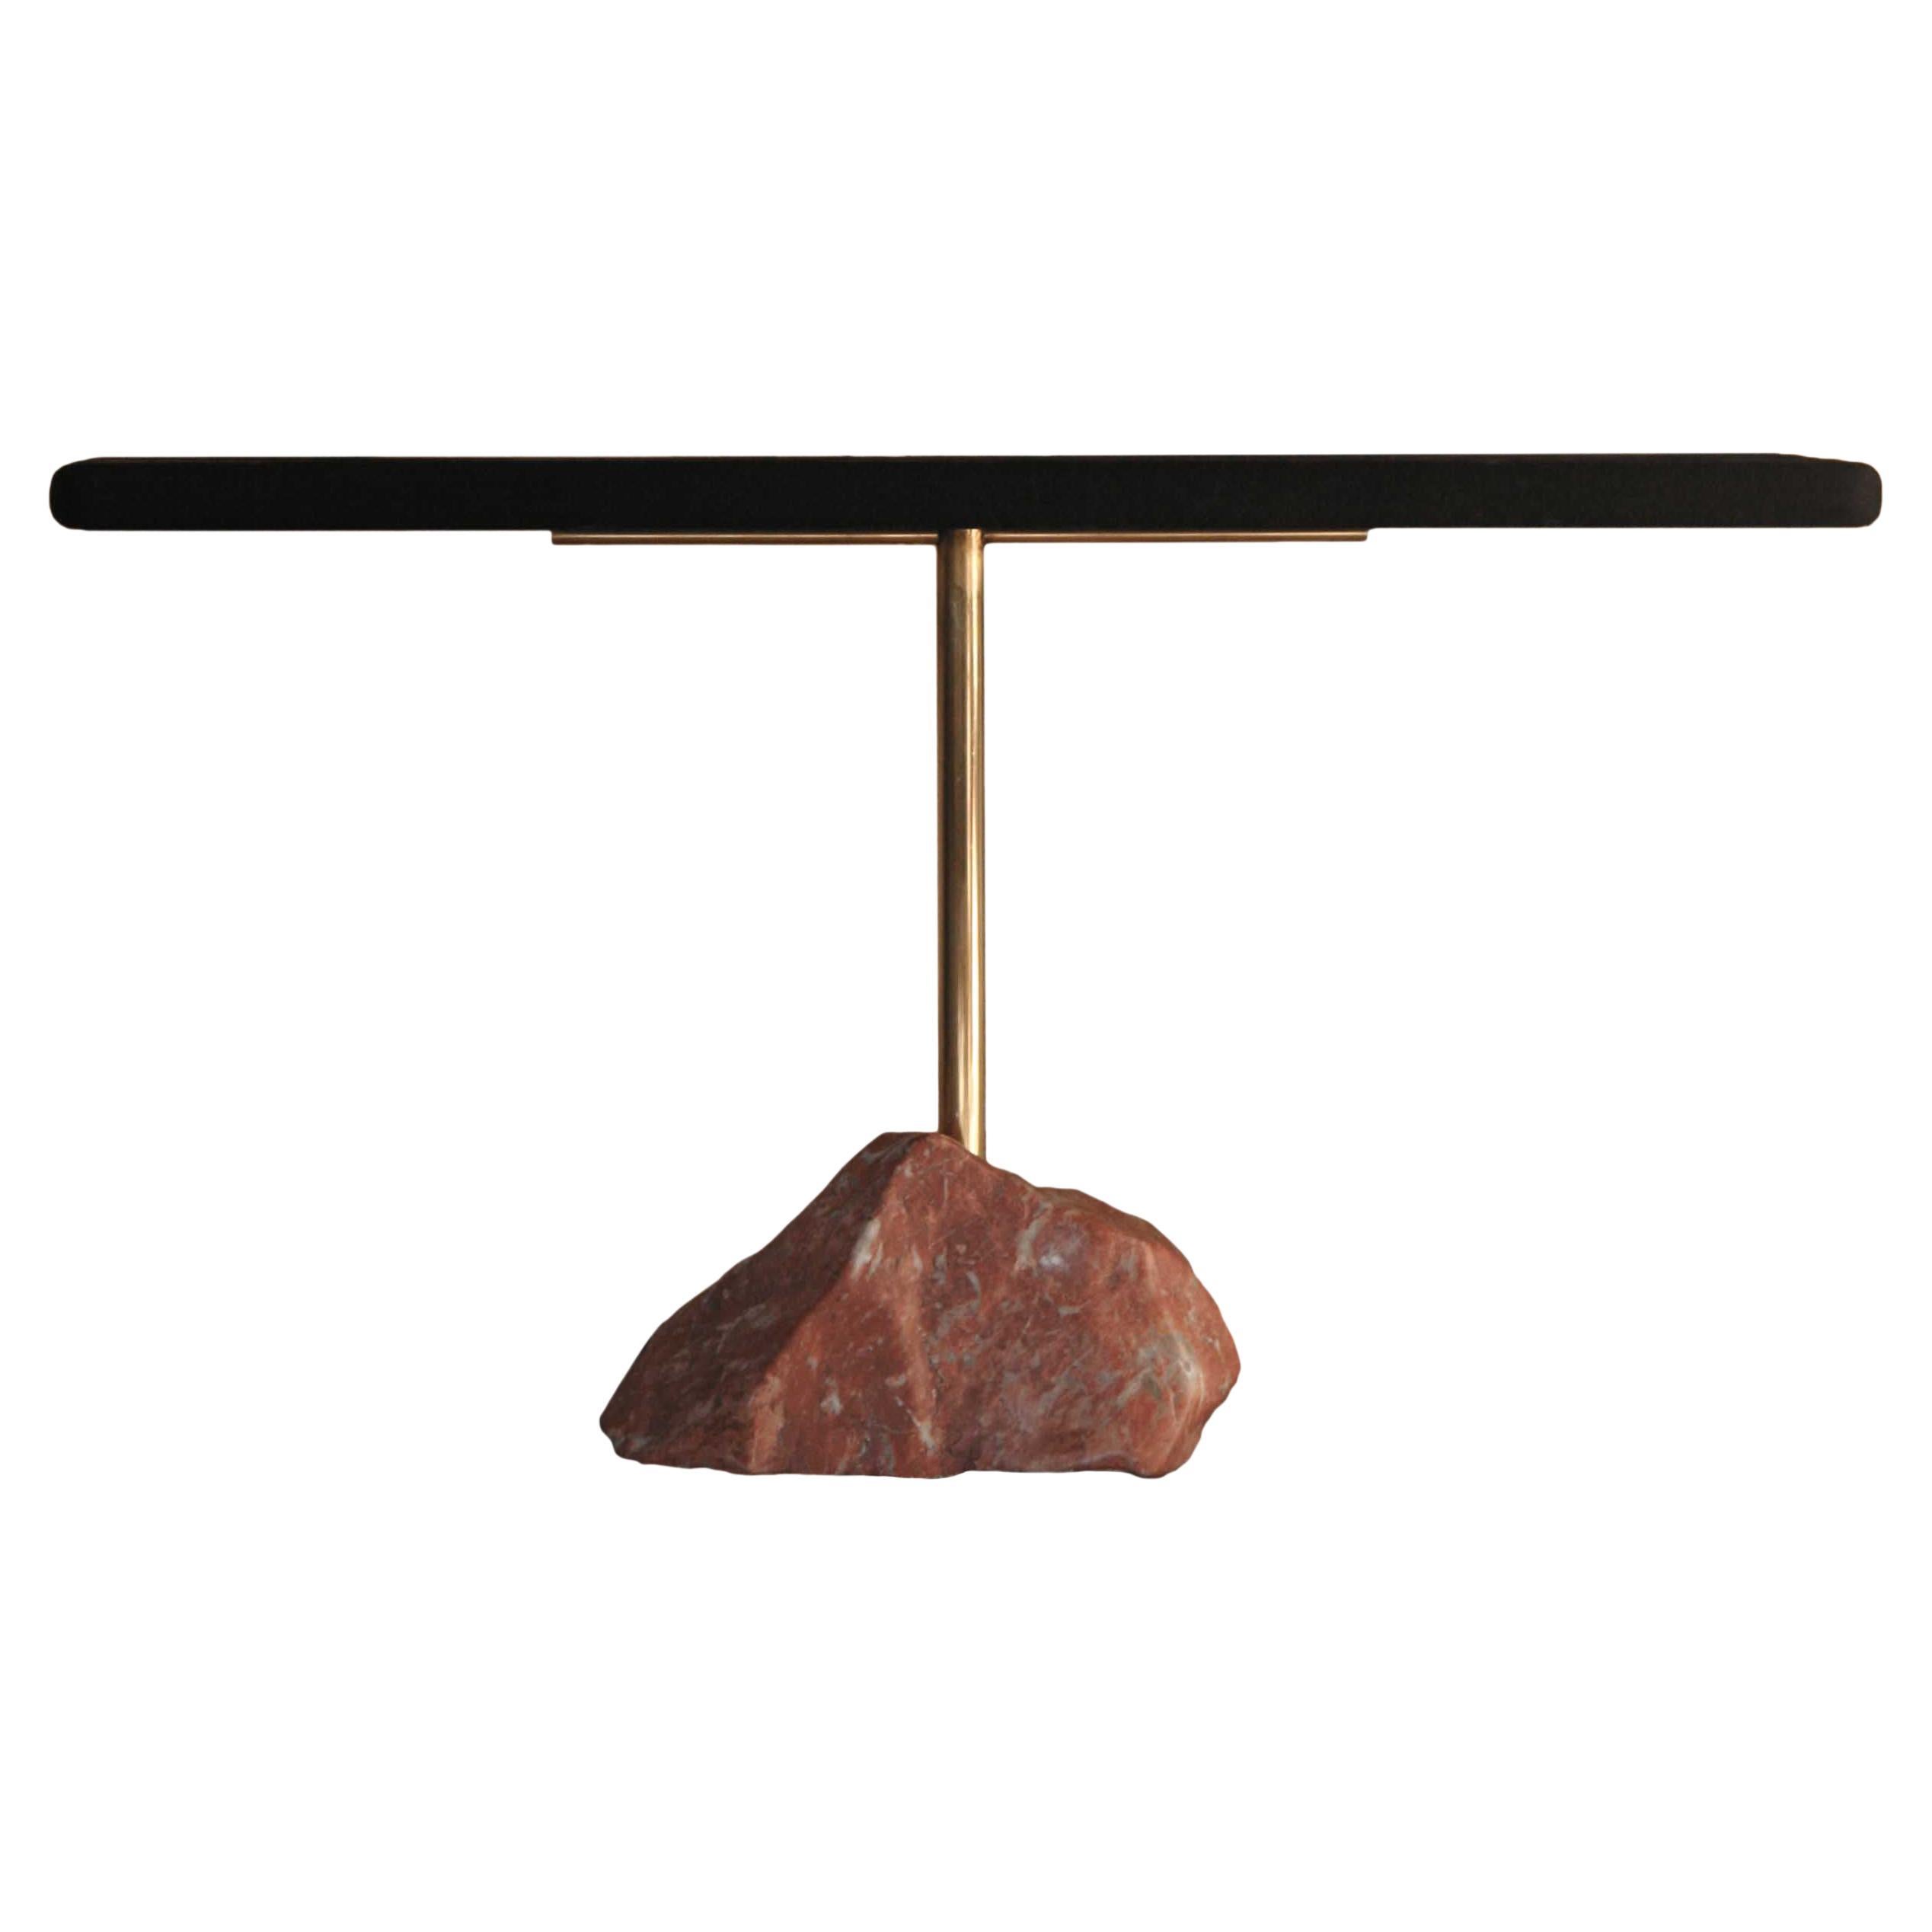 MB-01 Marble Base Sculptural Occasional, Console of Brass, Marble and Wood